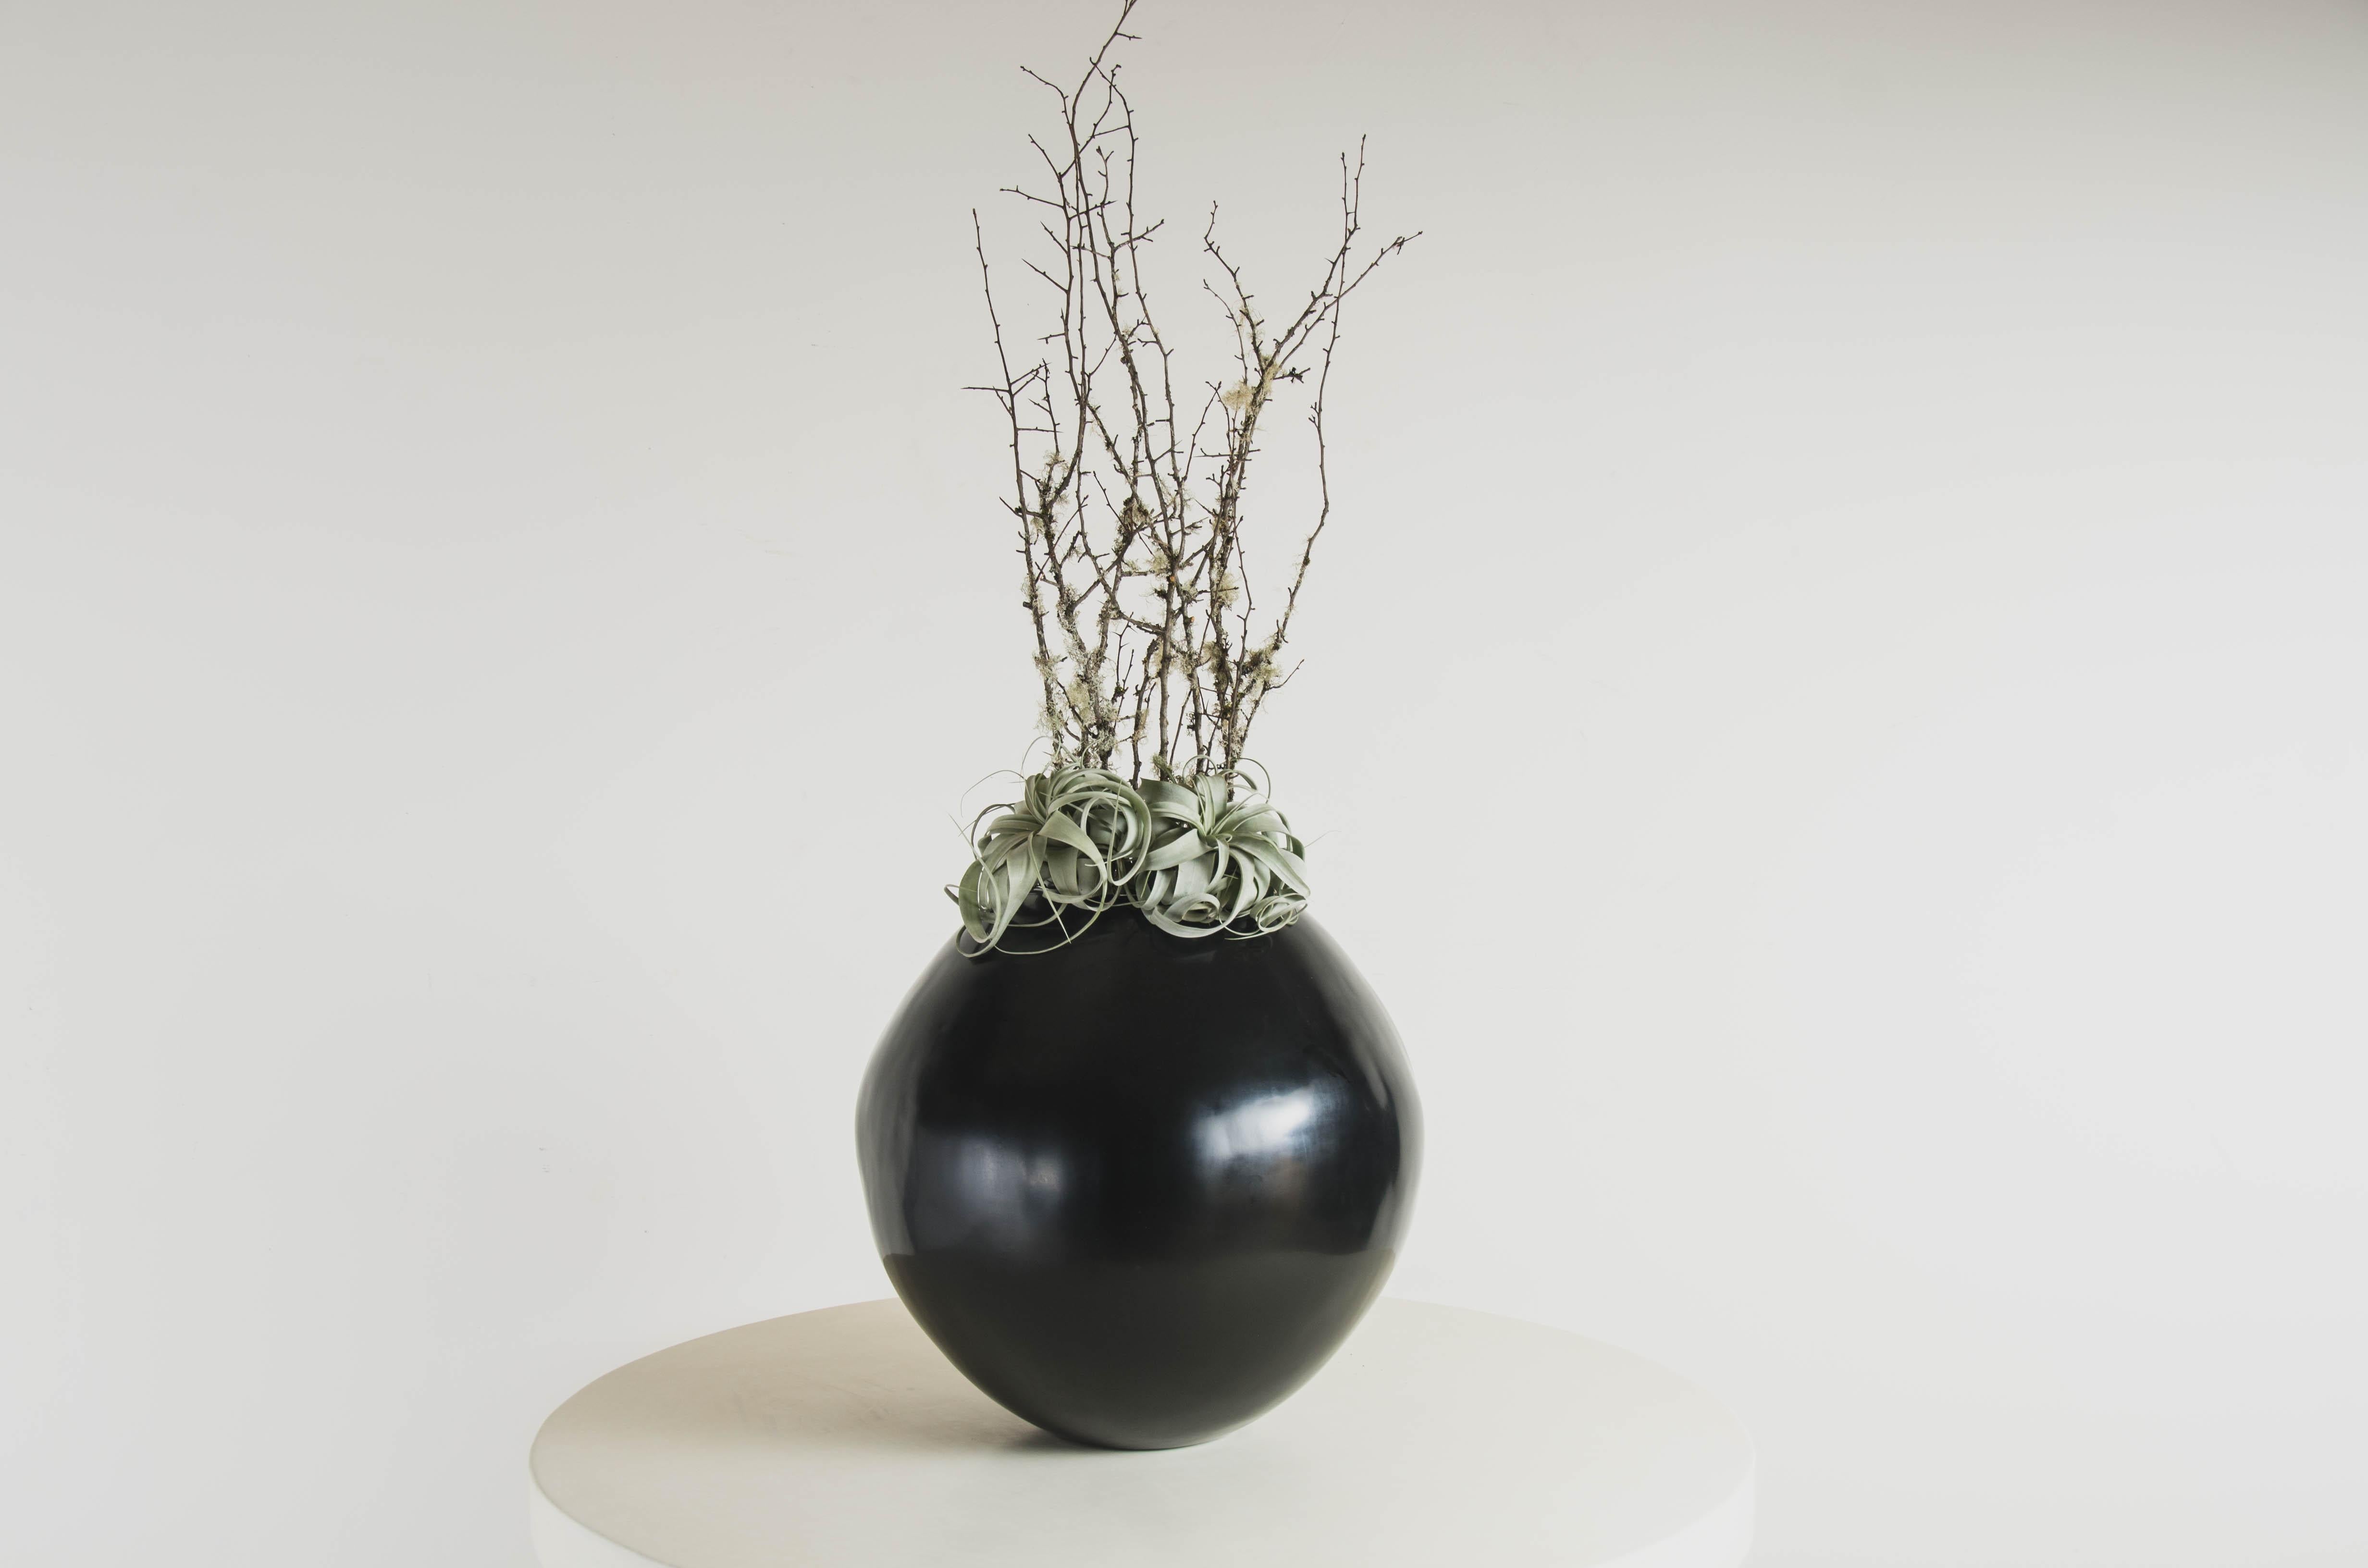 Chinese Full Moon Jar in Black Lacquer by Robert kuo, Limited Edition For Sale